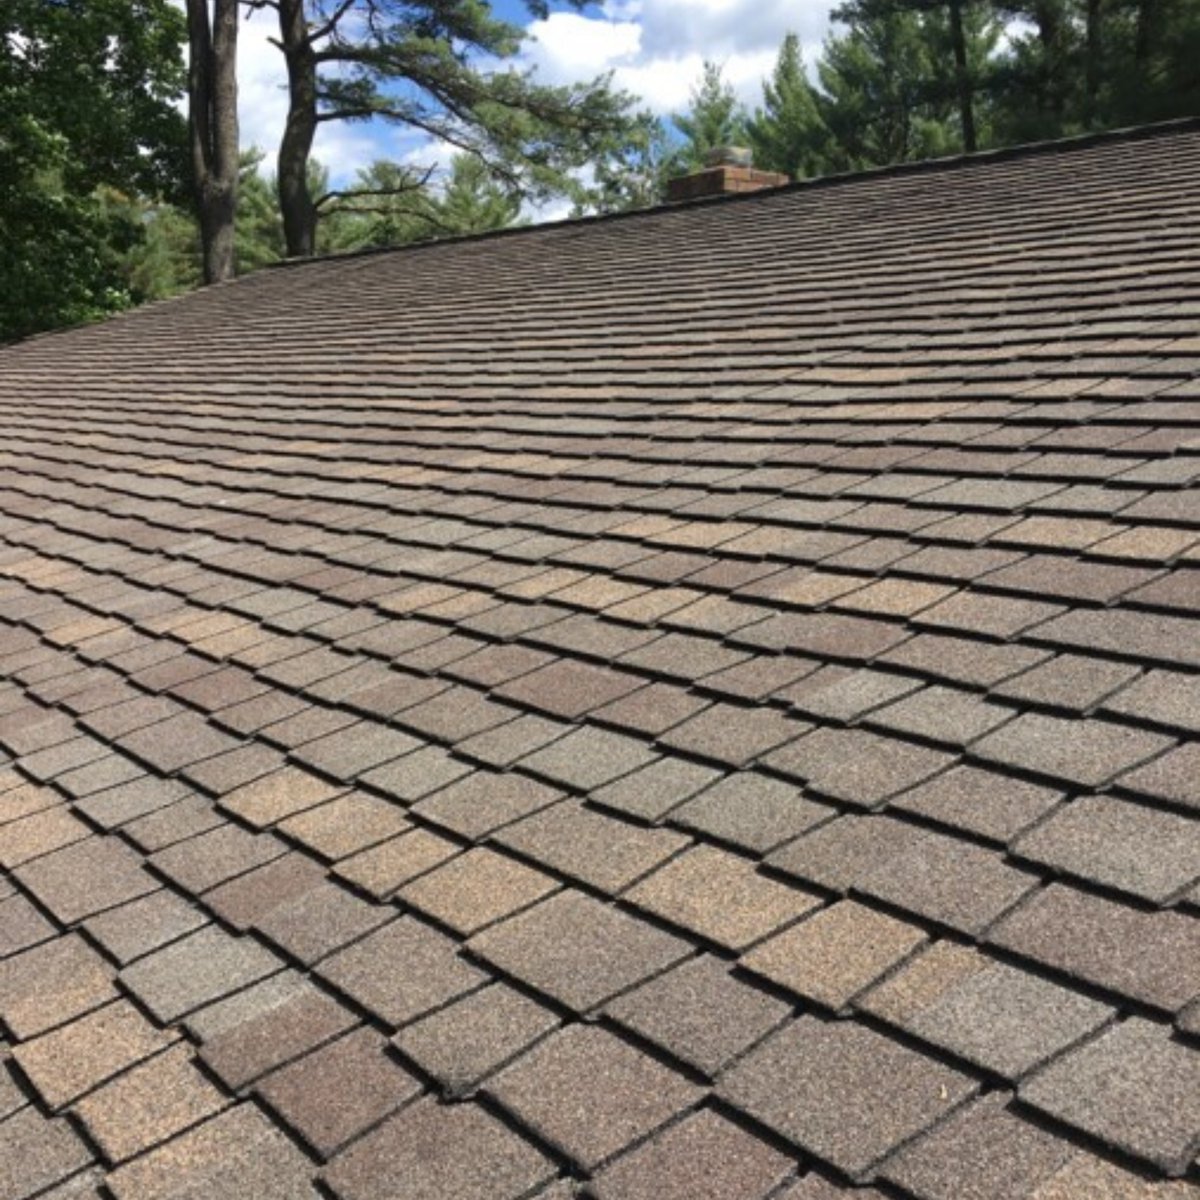 Those #SHINGLES though 😍

#NewRoof #AsphaltShingles #Roofing #Wisconsin #Beautiful #HomeImprovement